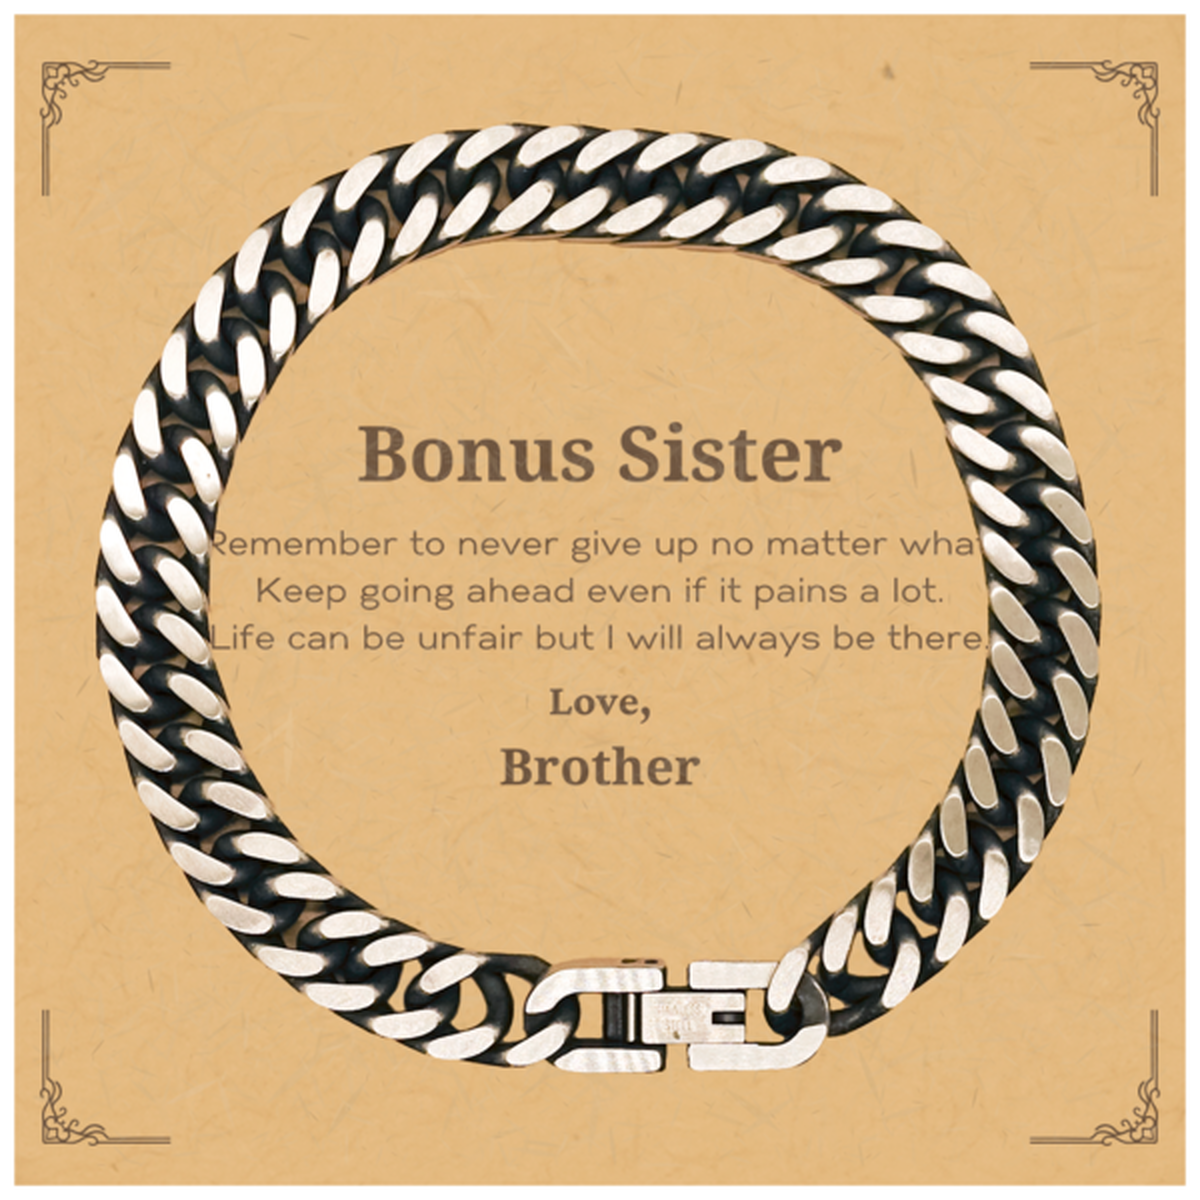 Bonus Sister Motivational Gifts from Brother, Remember to never give up no matter what, Inspirational Birthday Cuban Link Chain Bracelet for Bonus Sister